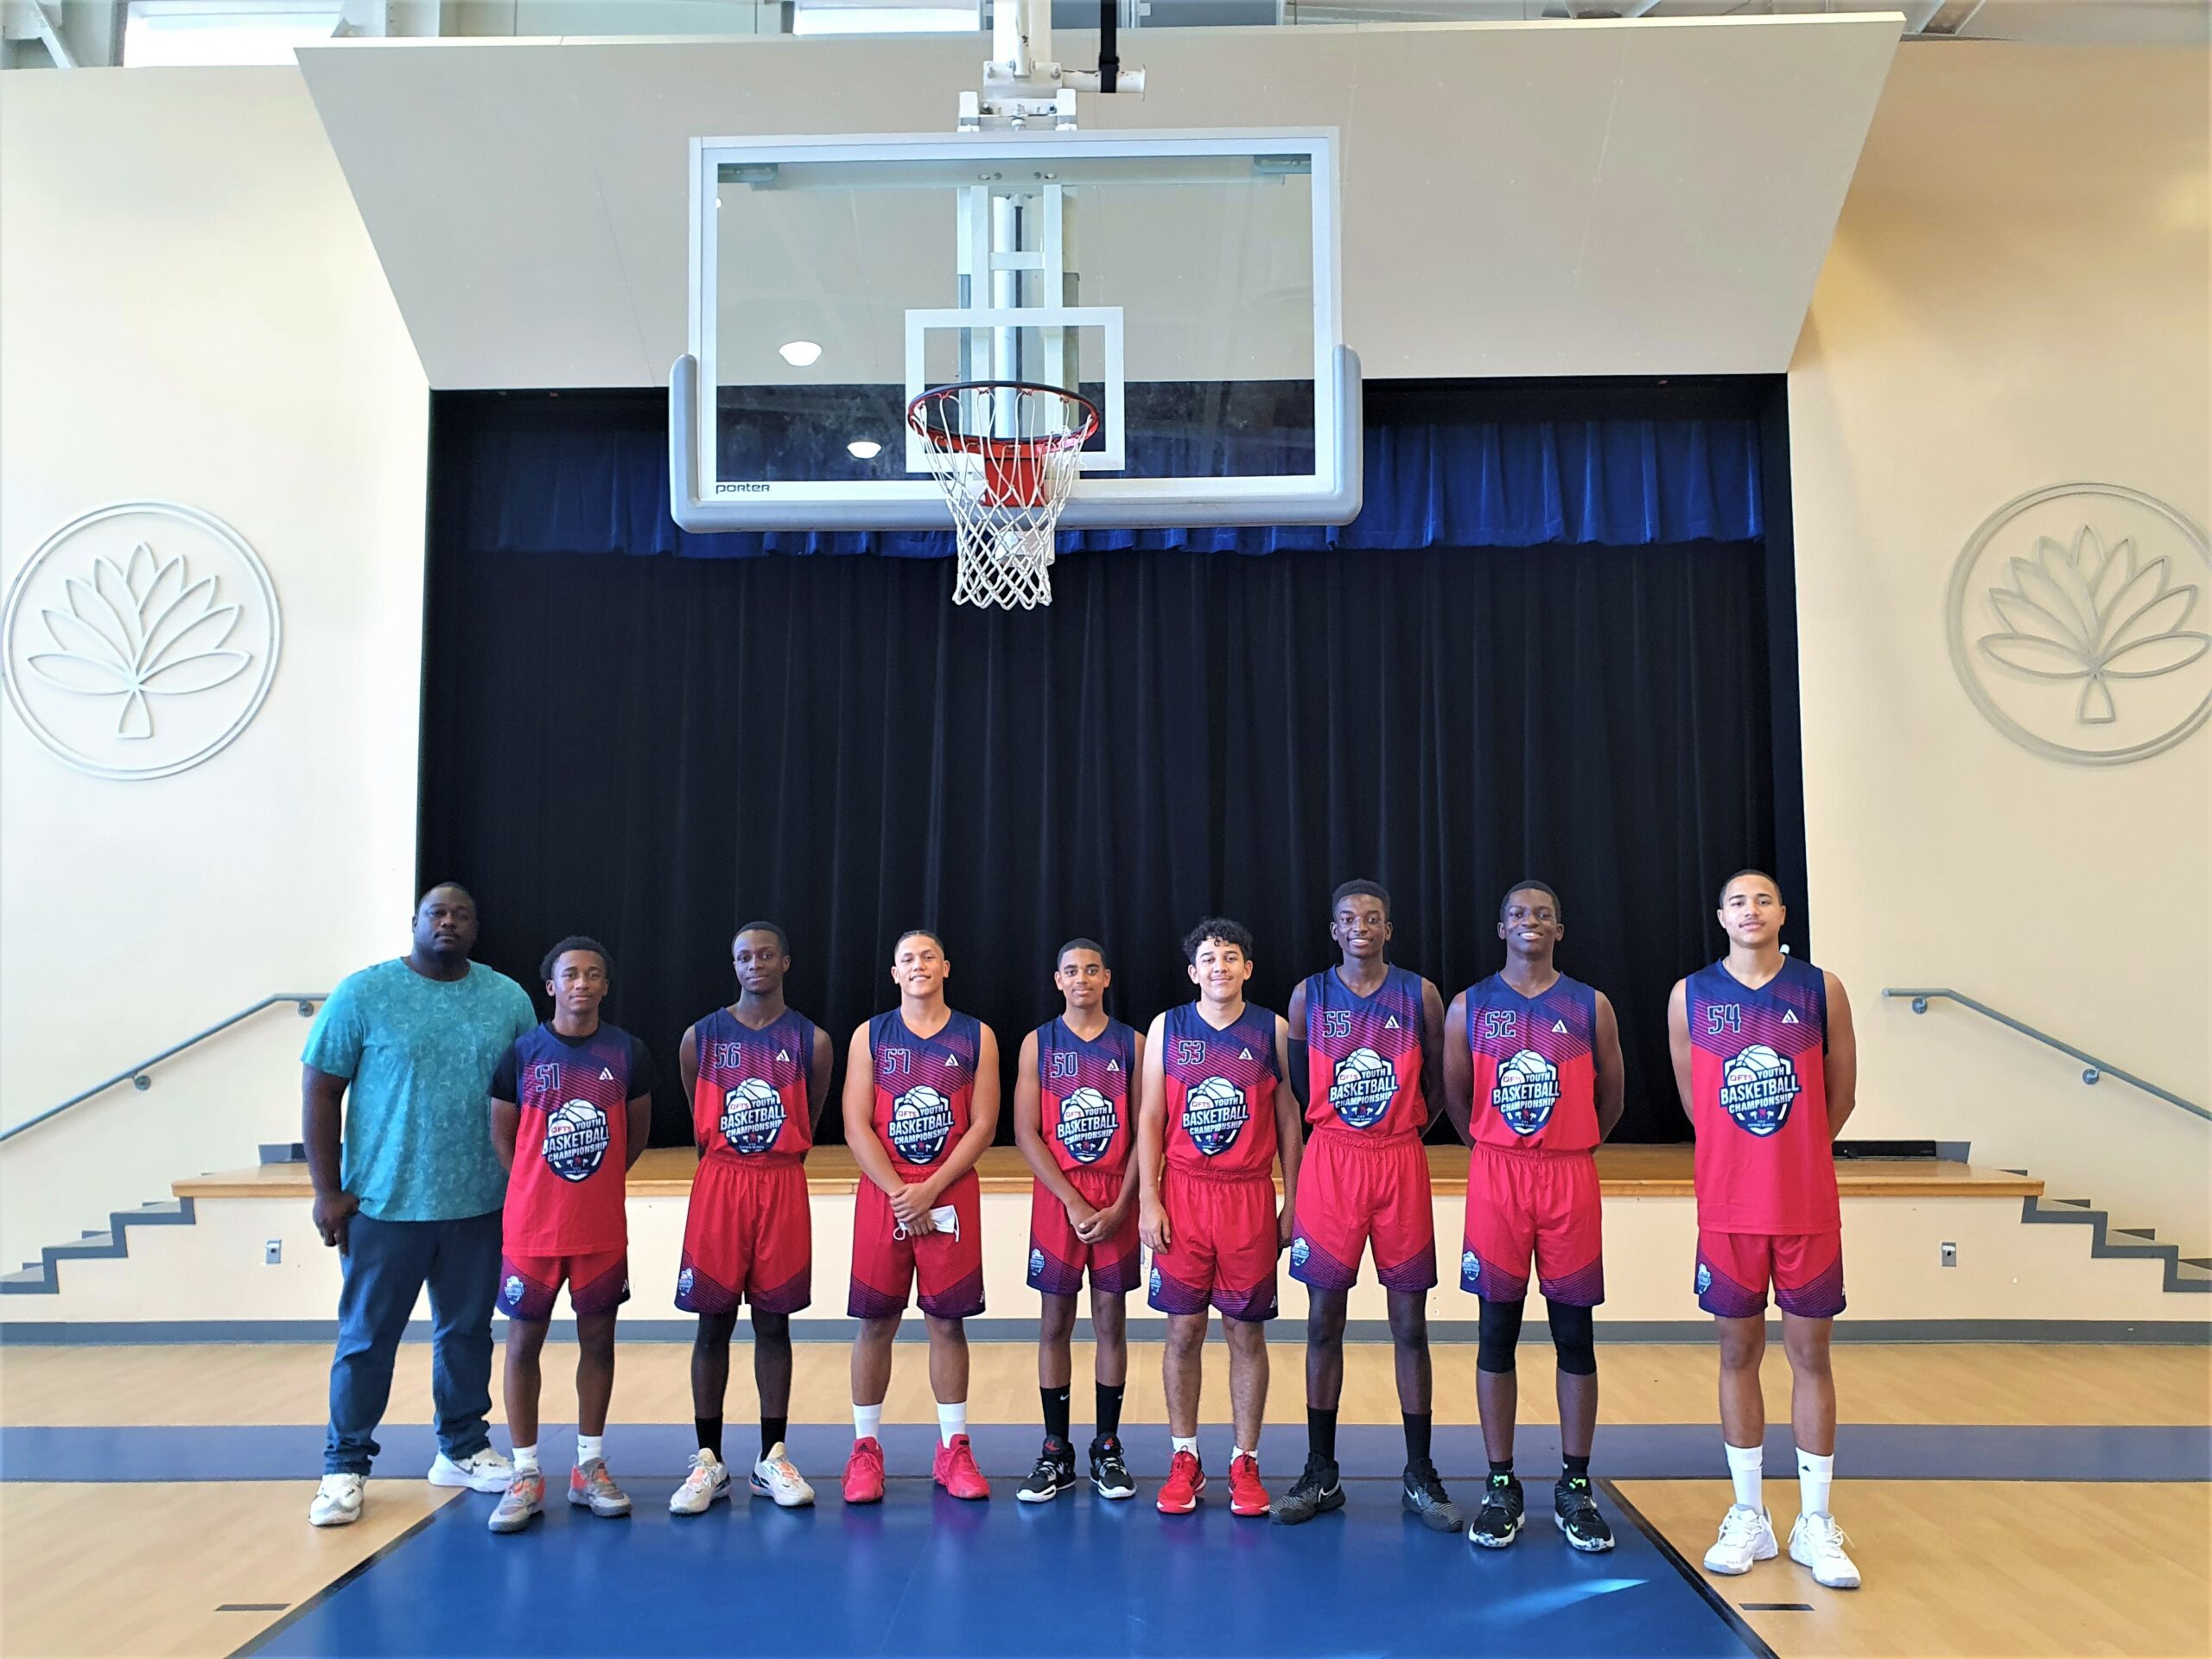 Gallery - FTS Youth Basketball Championship 2022